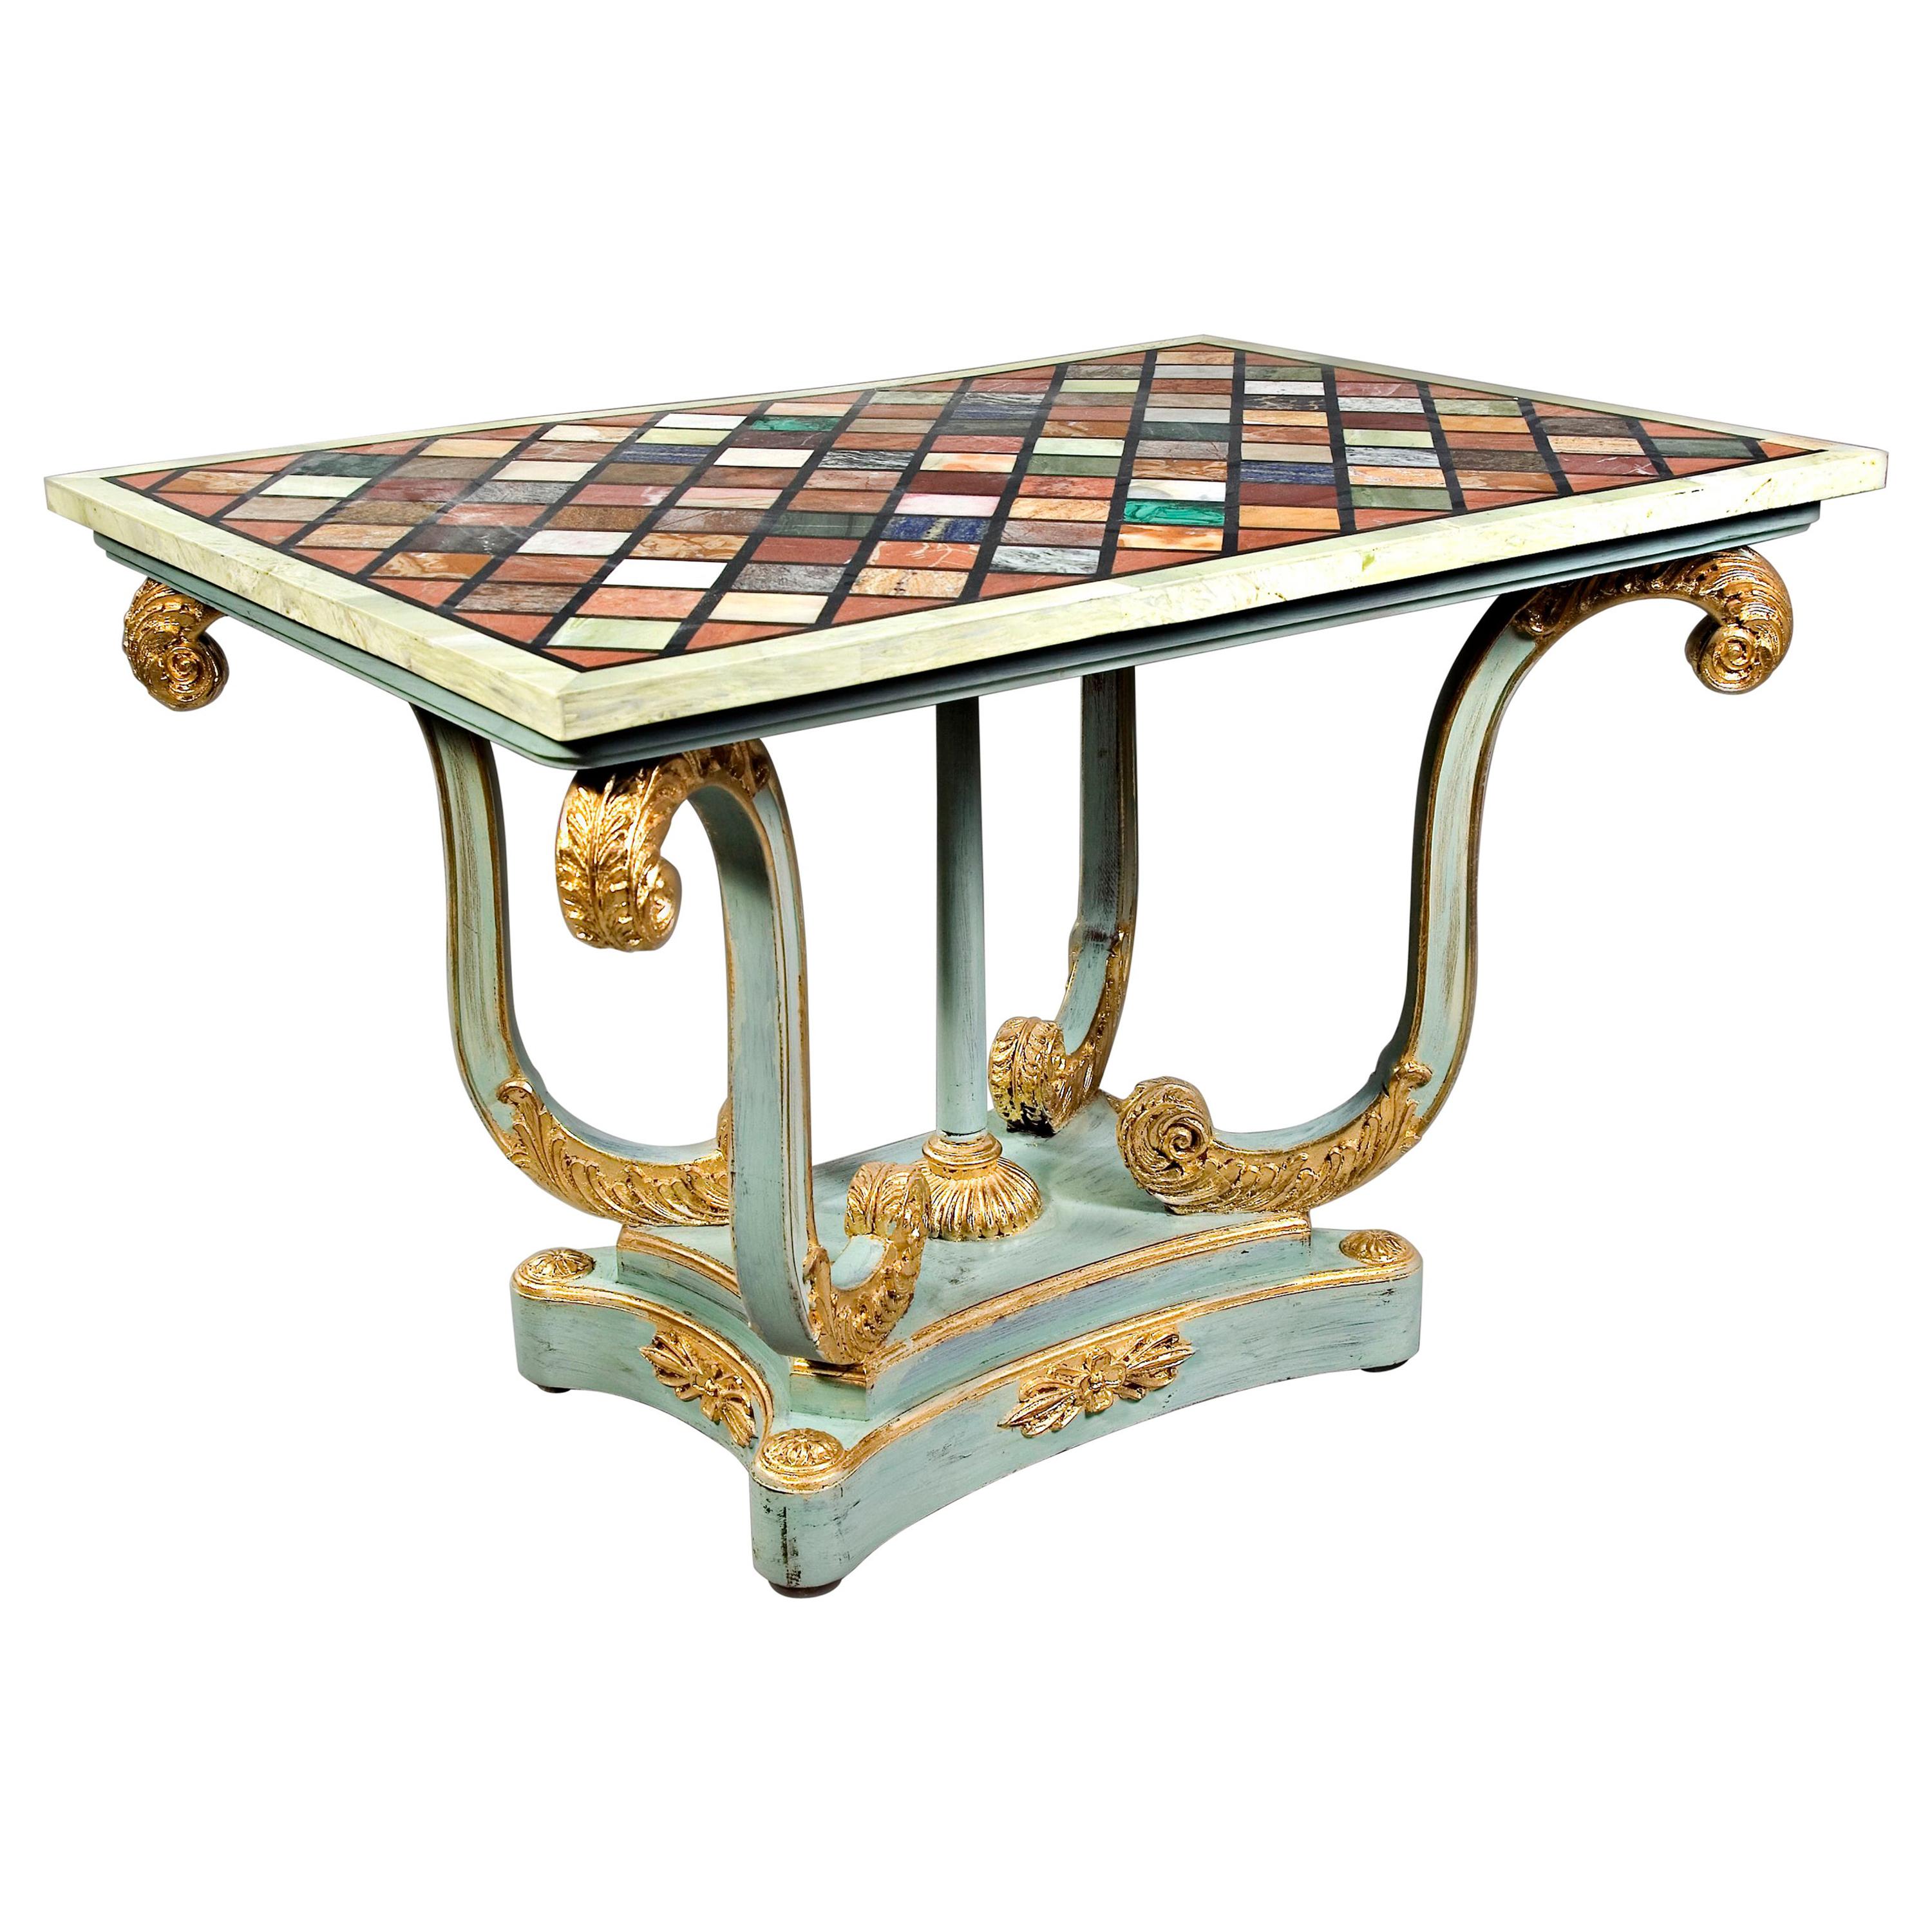 20th Century Pietra-Dura Style of Classicism Pastel Light Blue Table For Sale